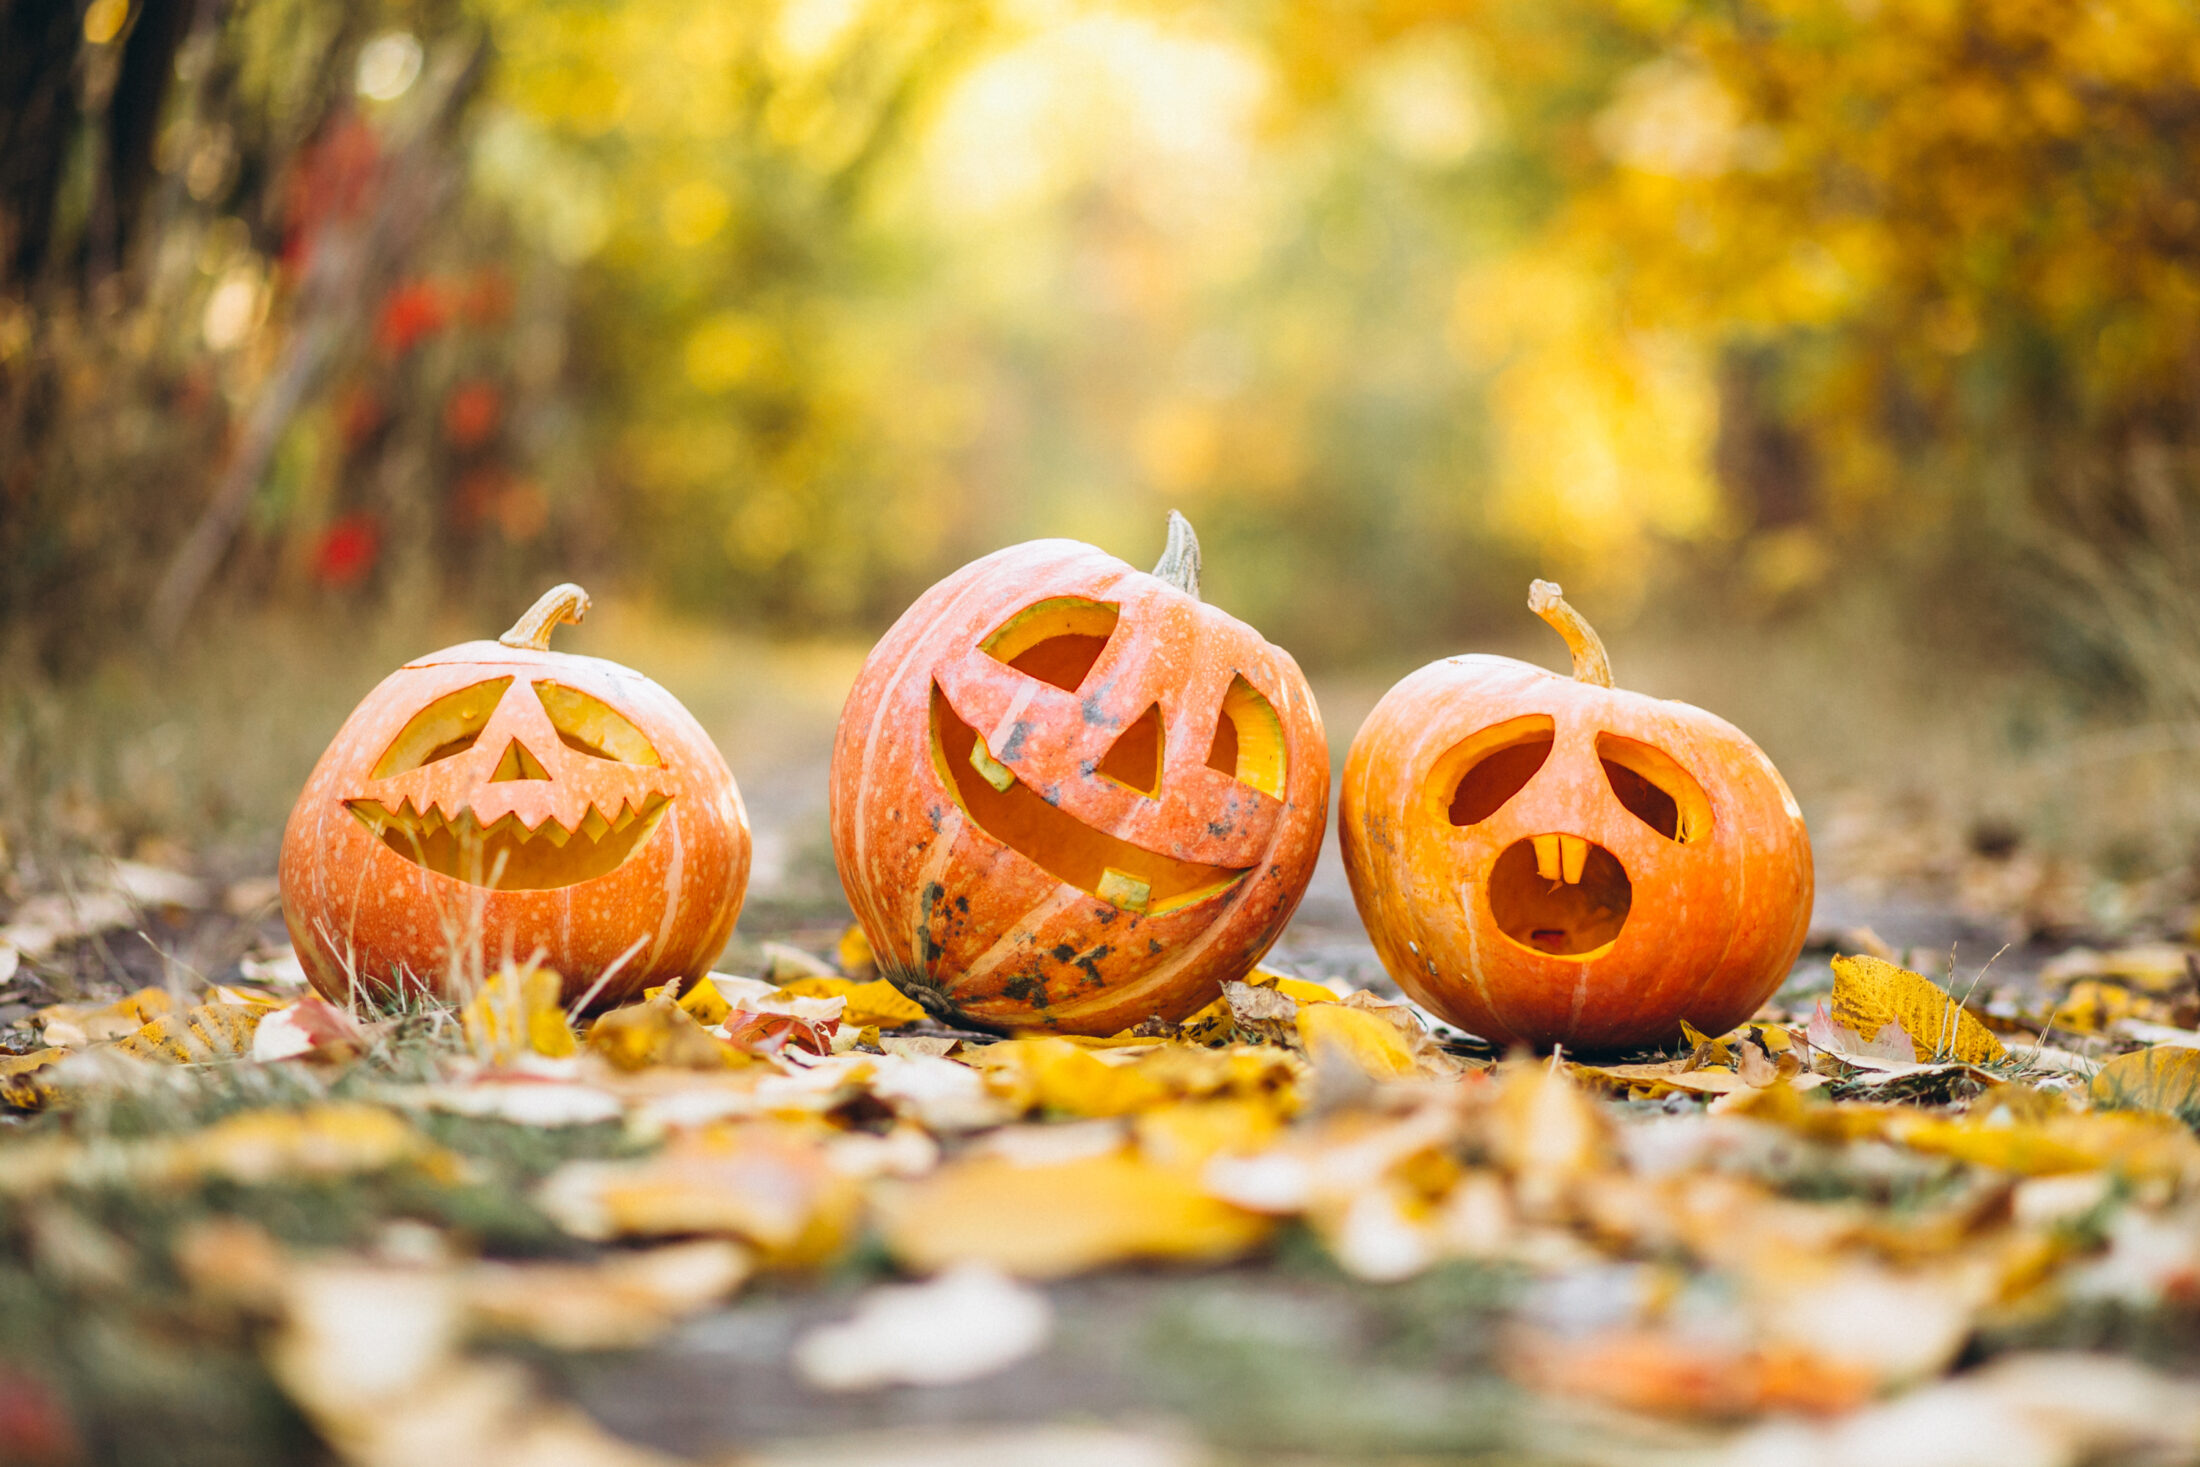 Carve a pumpkin and win £500 for your school!